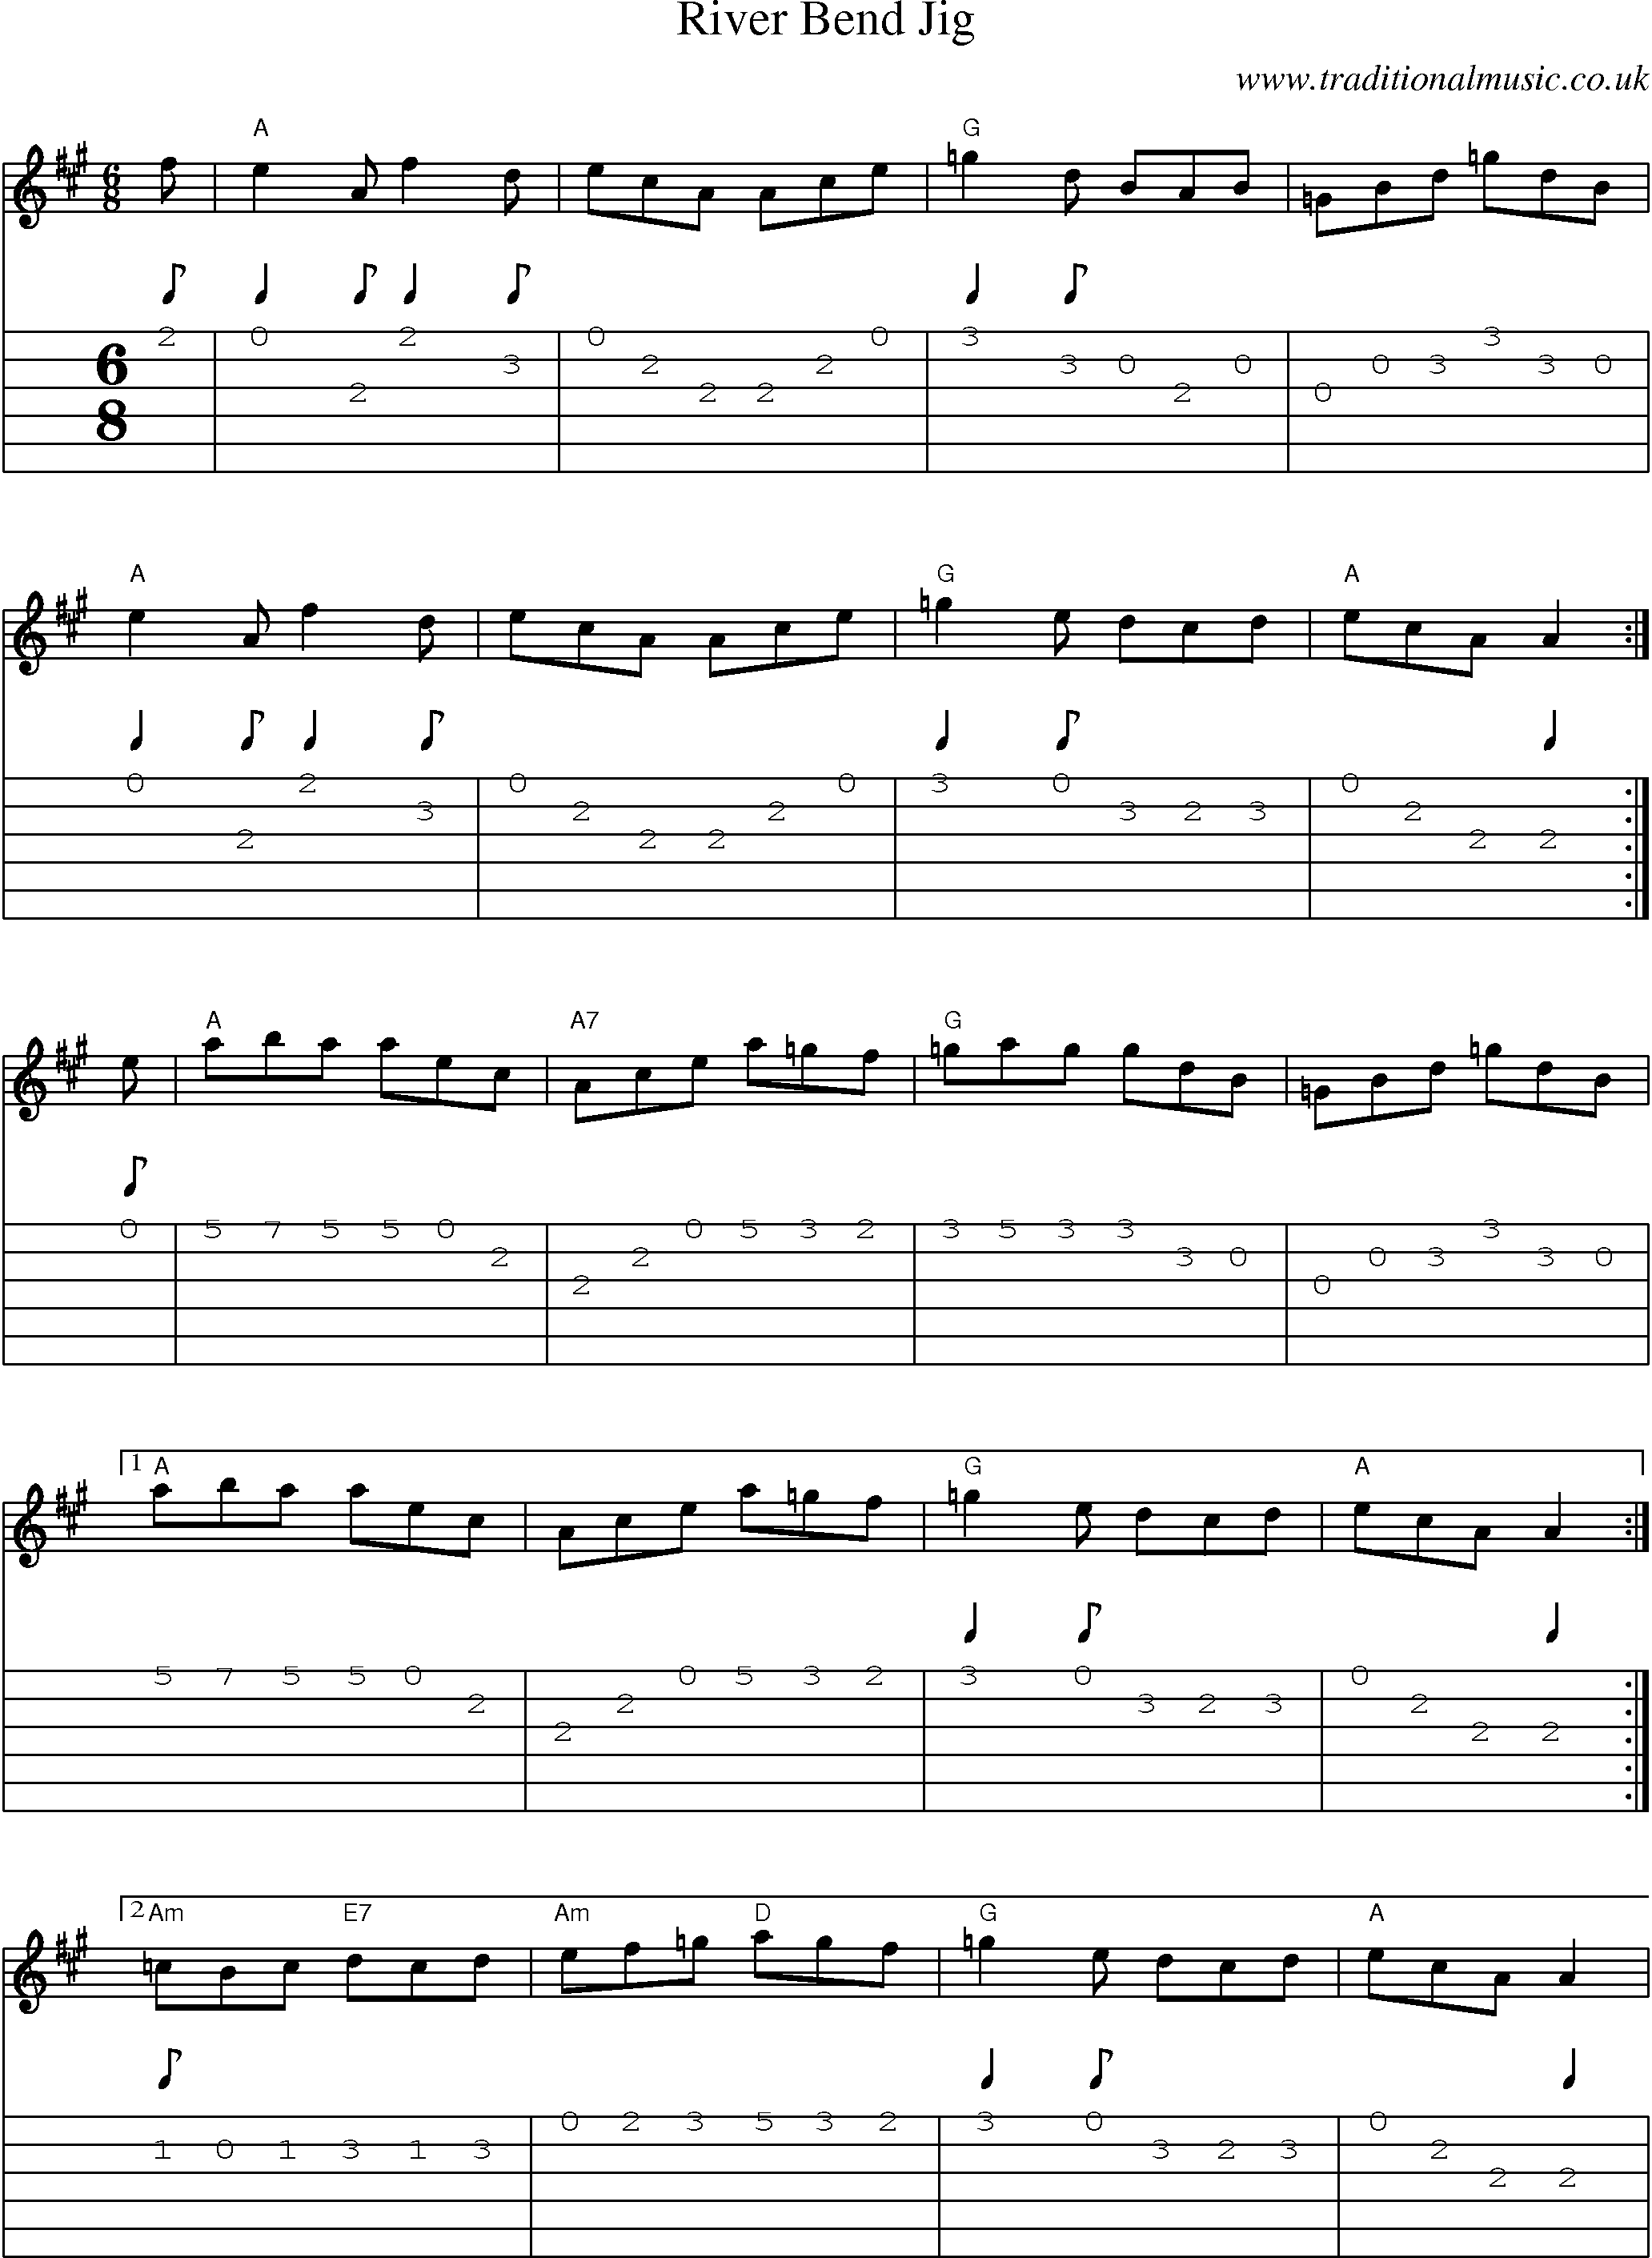 Music Score and Guitar Tabs for River Bend Jig